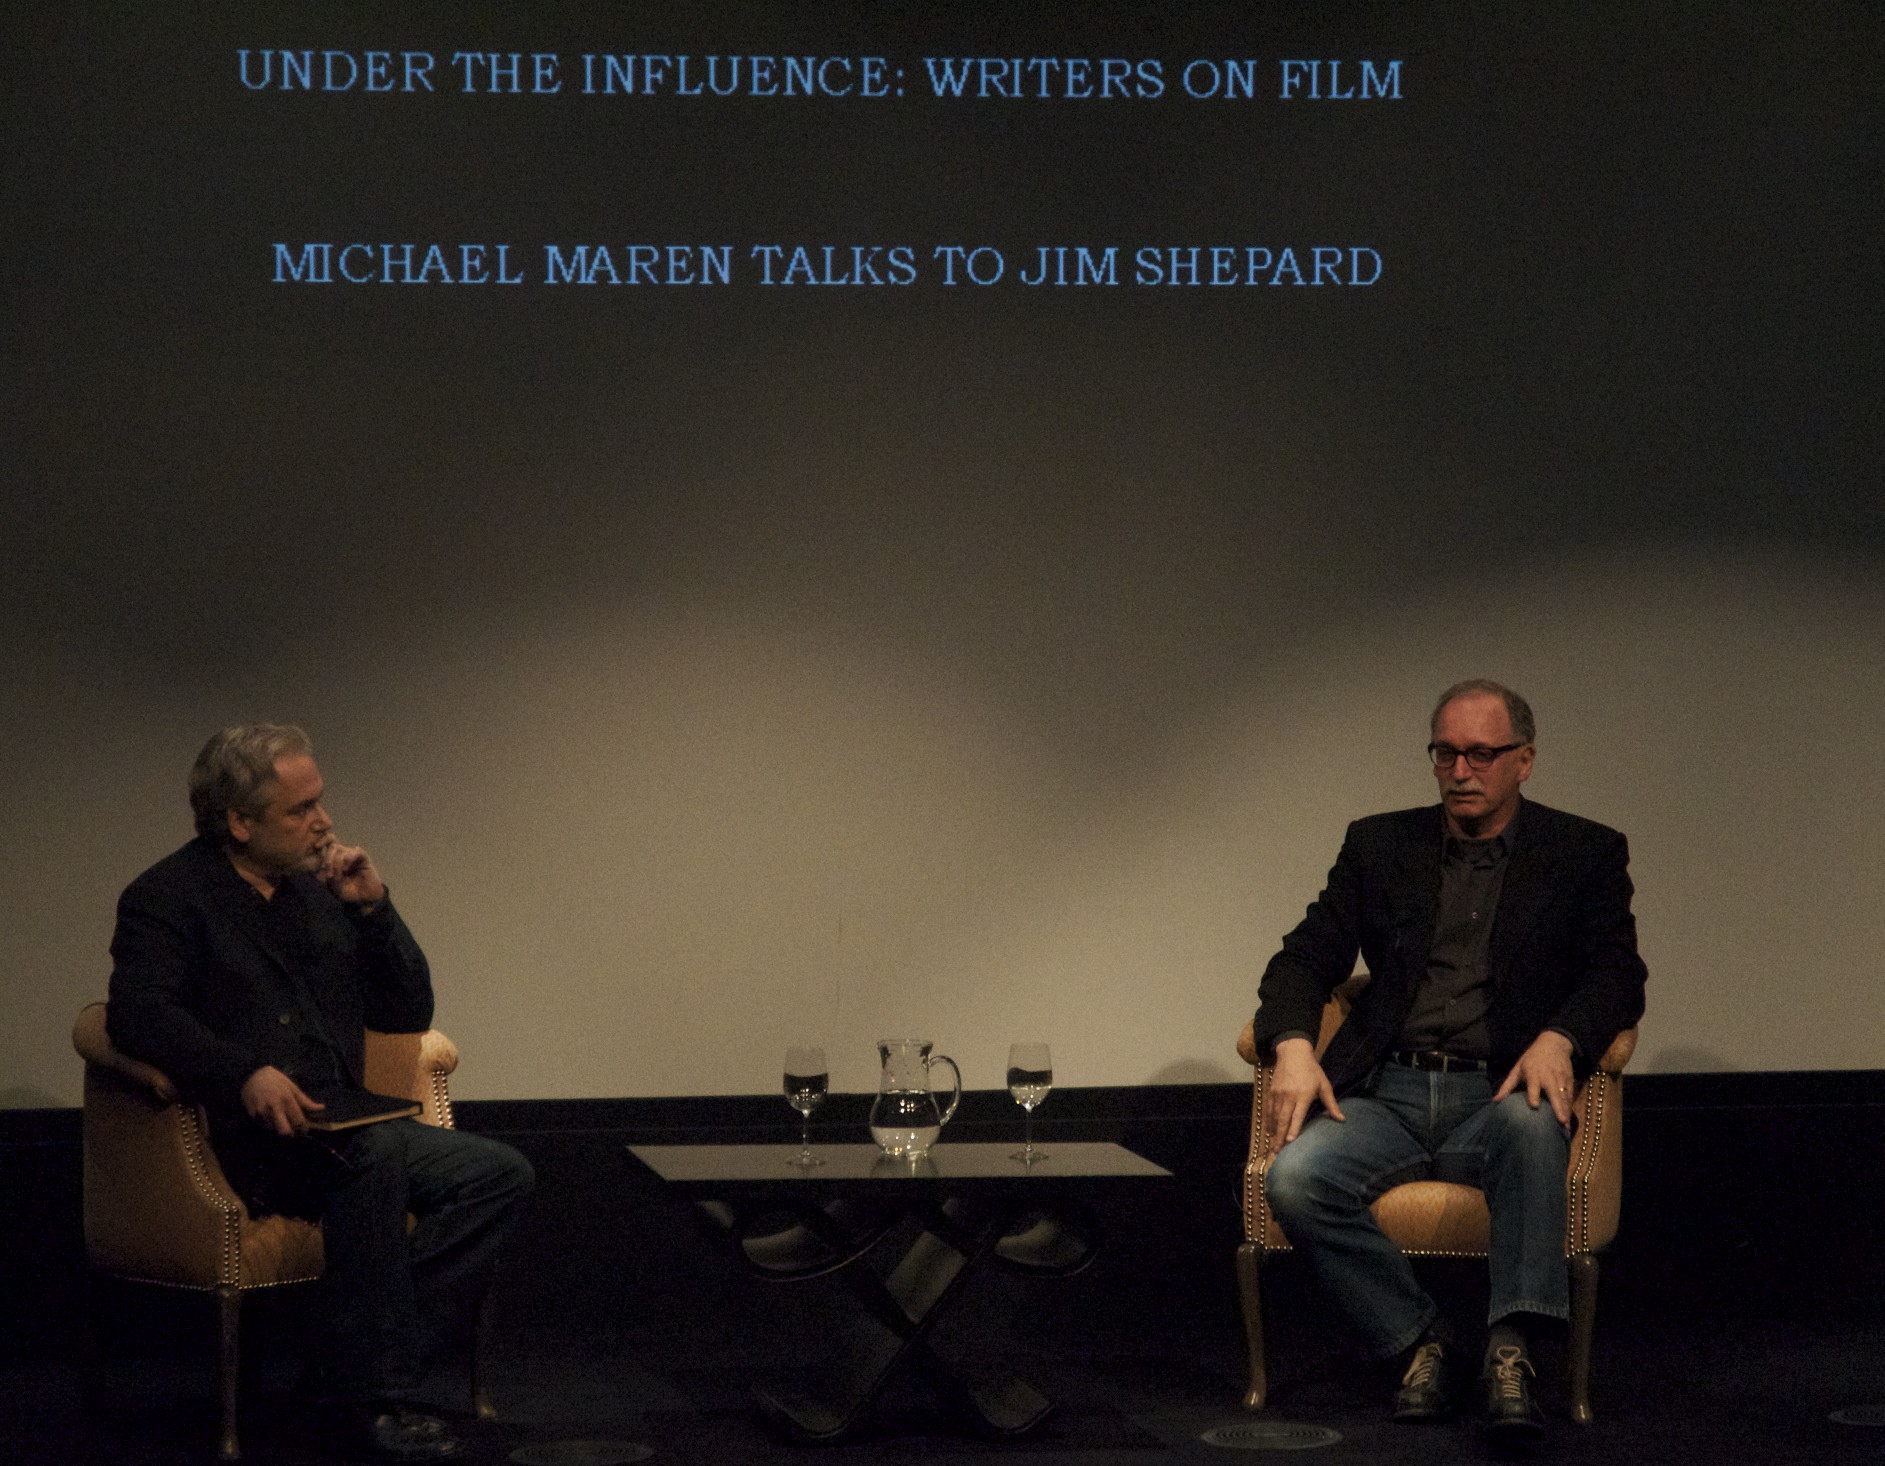 Me yapping with Jim Shepard about Werner Herzog's "Aguirre, the Wrath of God" last night. - Version 2